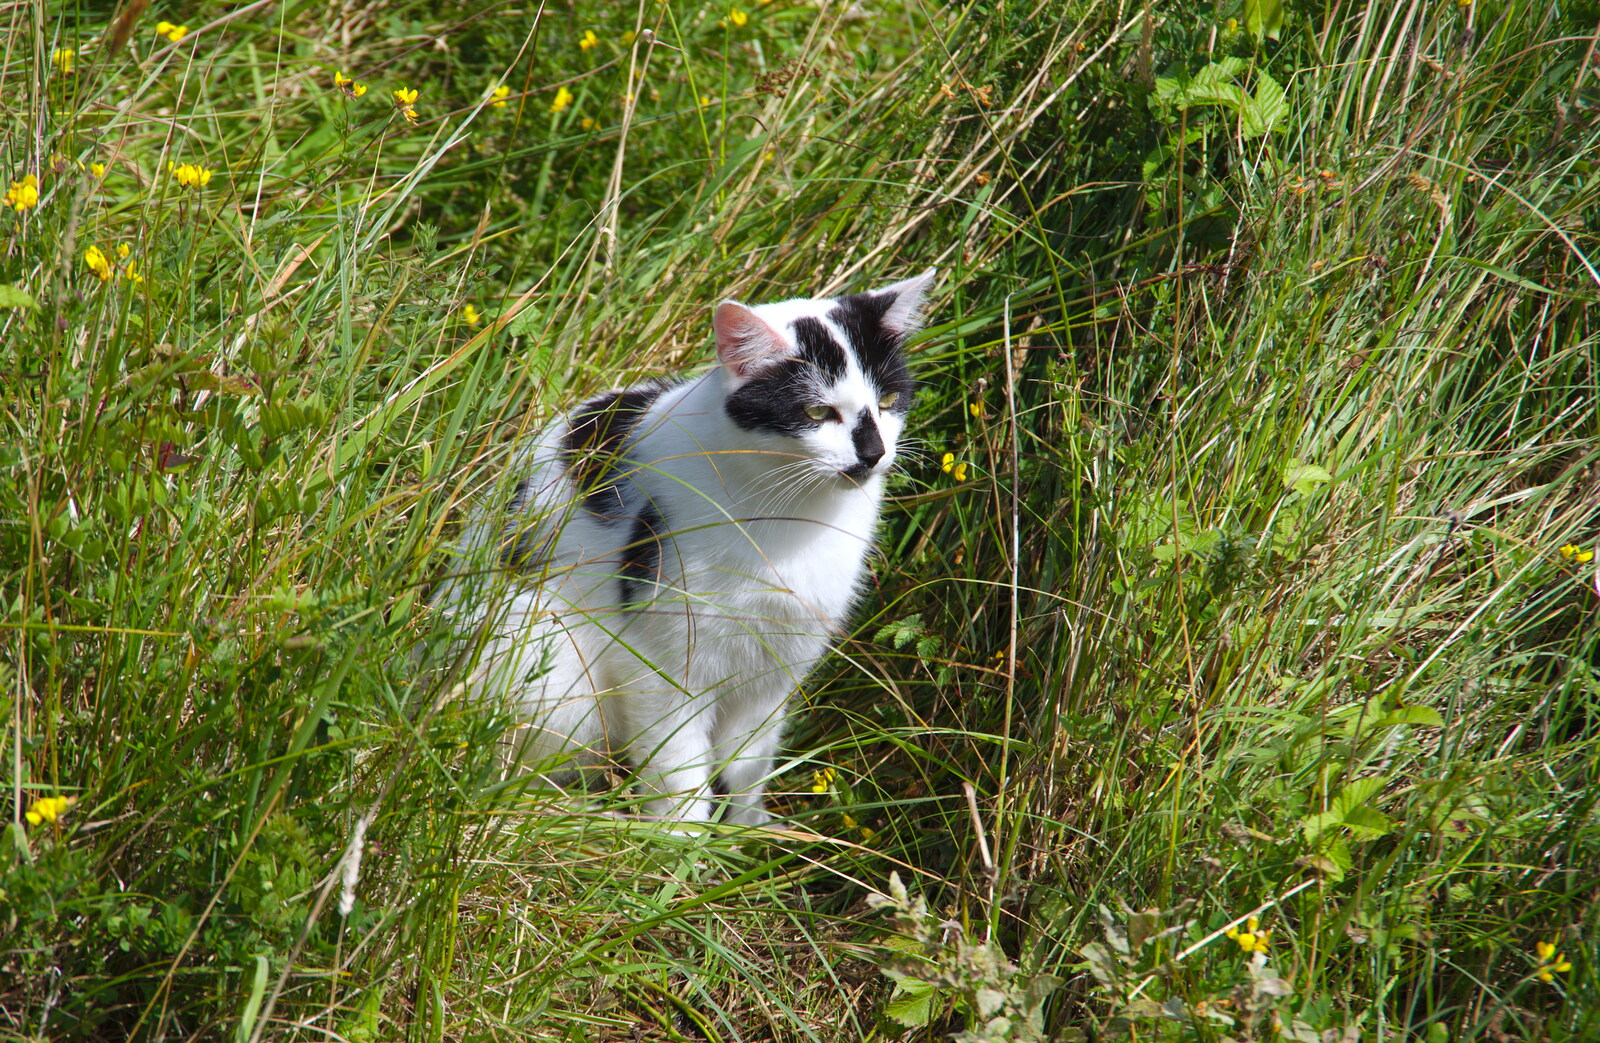 A cat in the long grass from Glencar Waterfall and Parke's Castle, Kilmore, Leitrim, Ireland - 18th August 2019